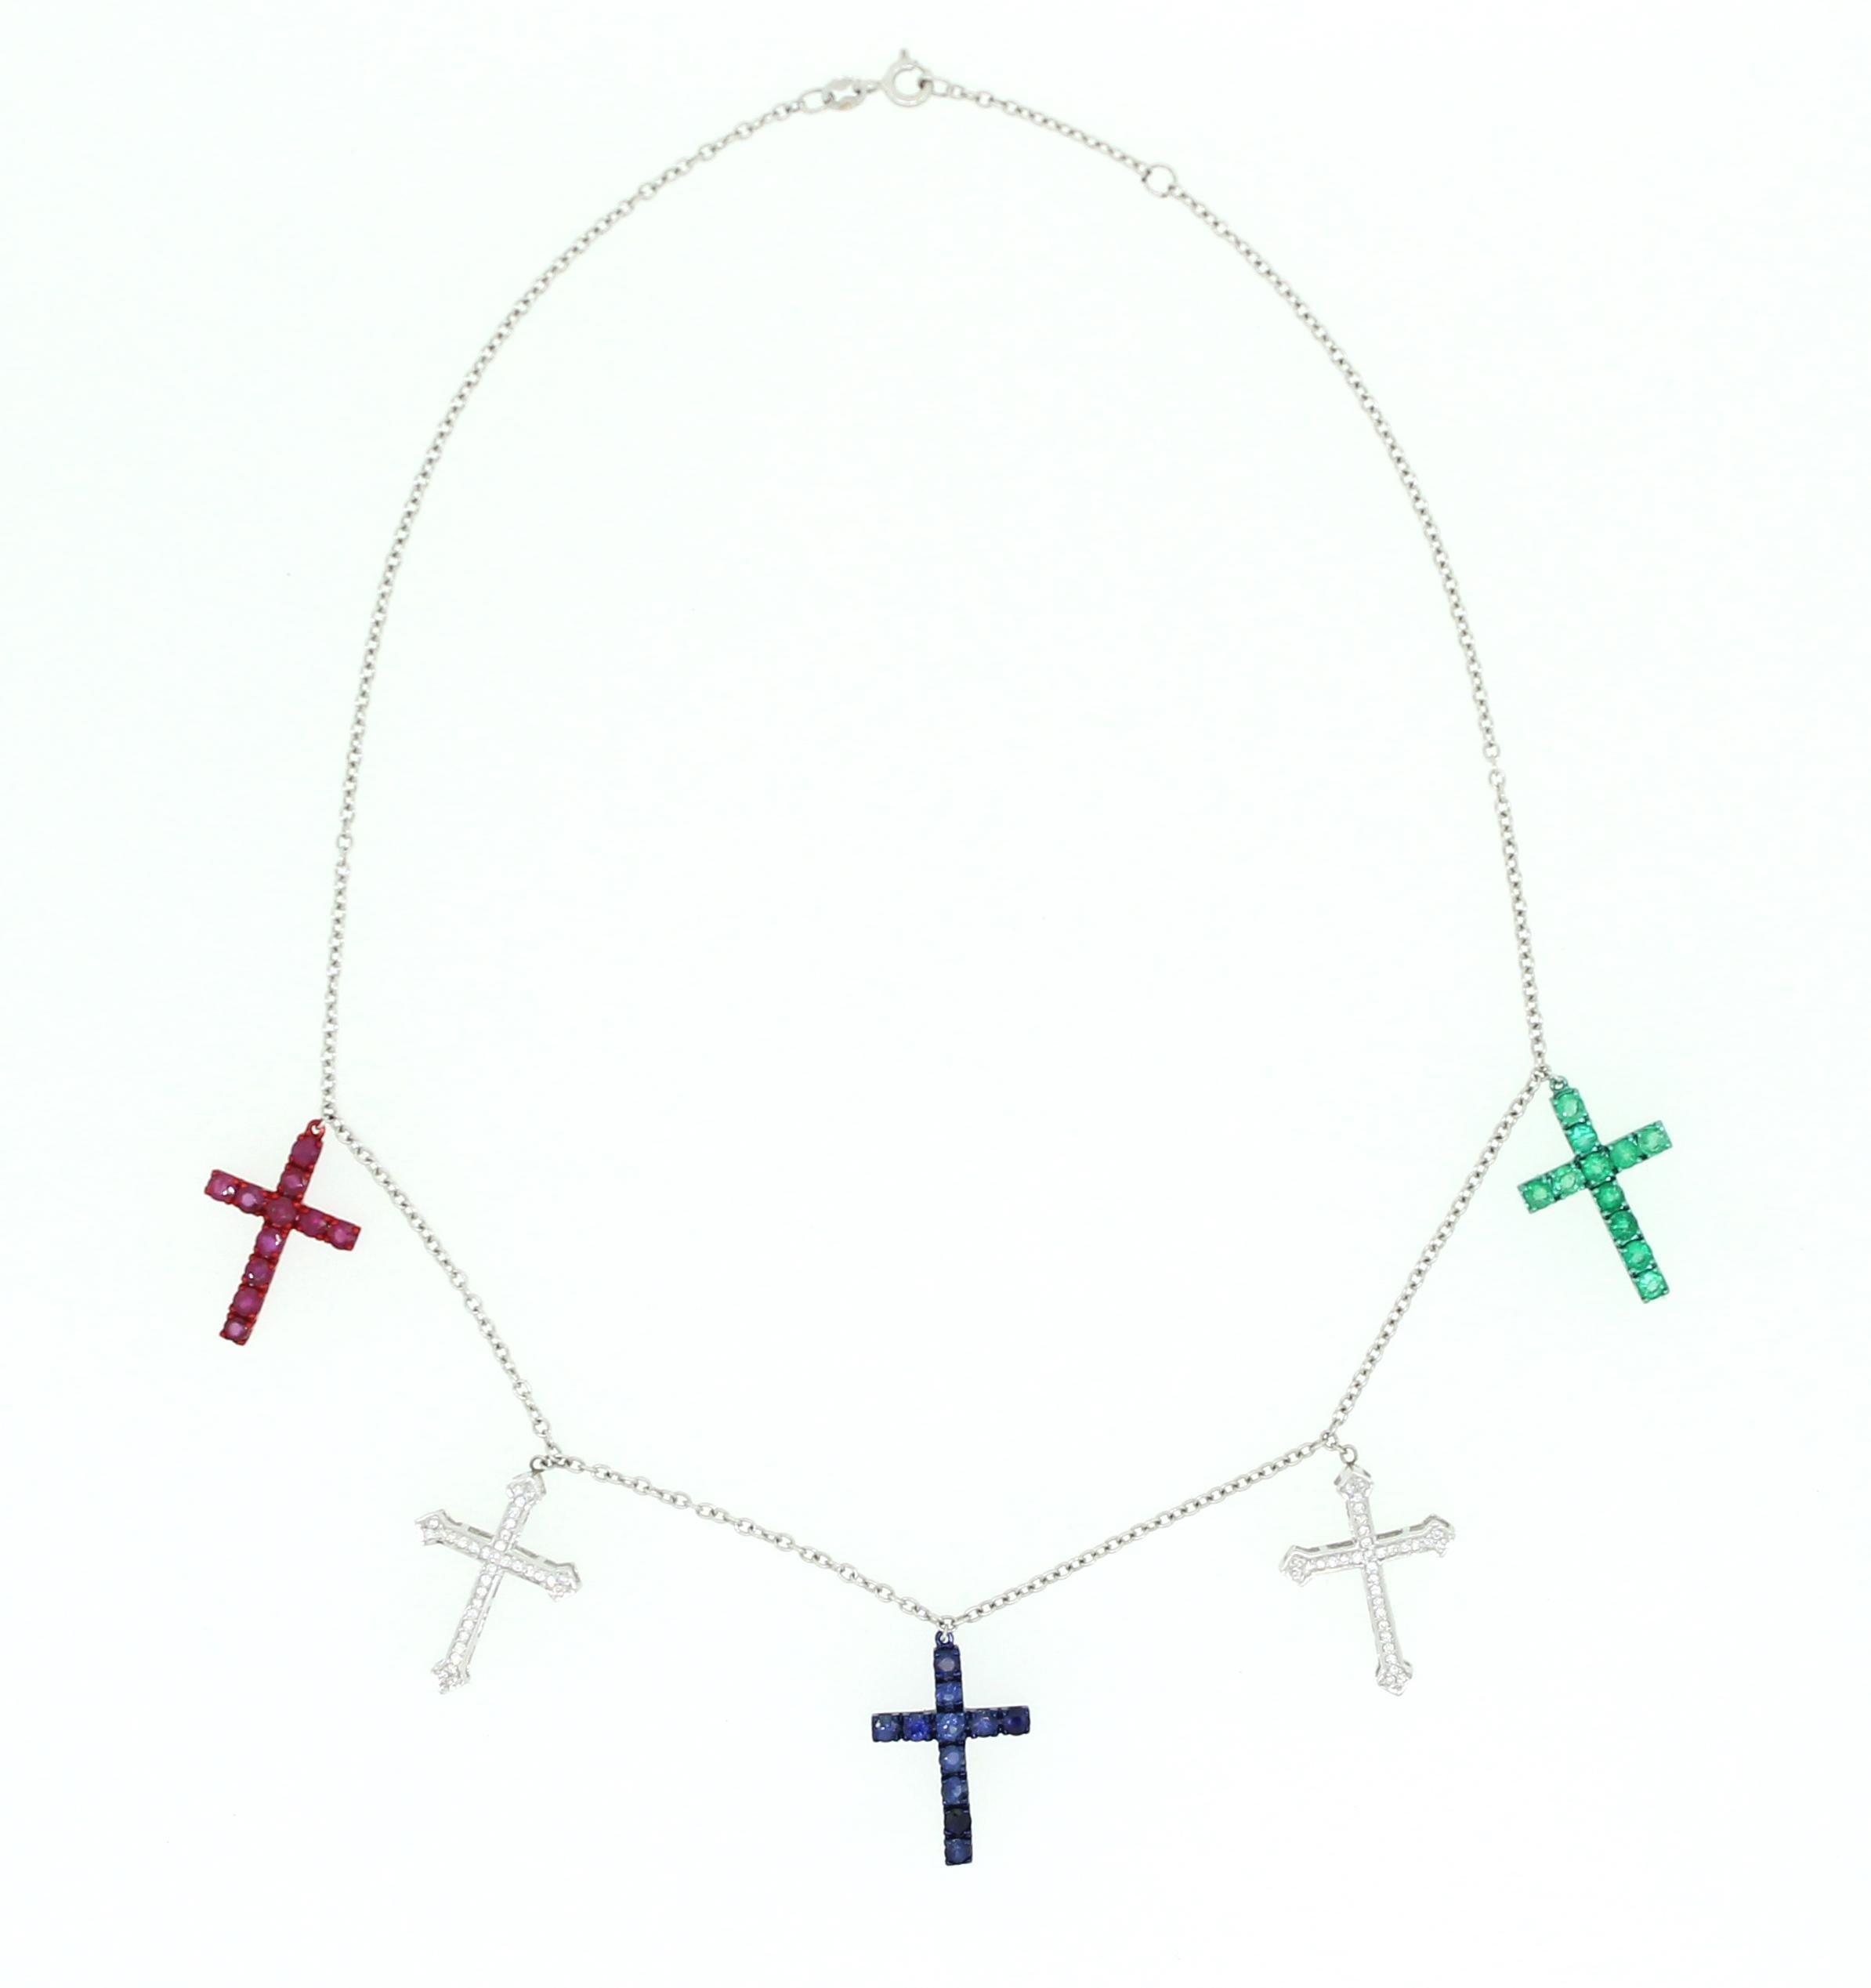 Diamonds, Emerald, Ruby and Sapphire Crosses Charms Necklace 1